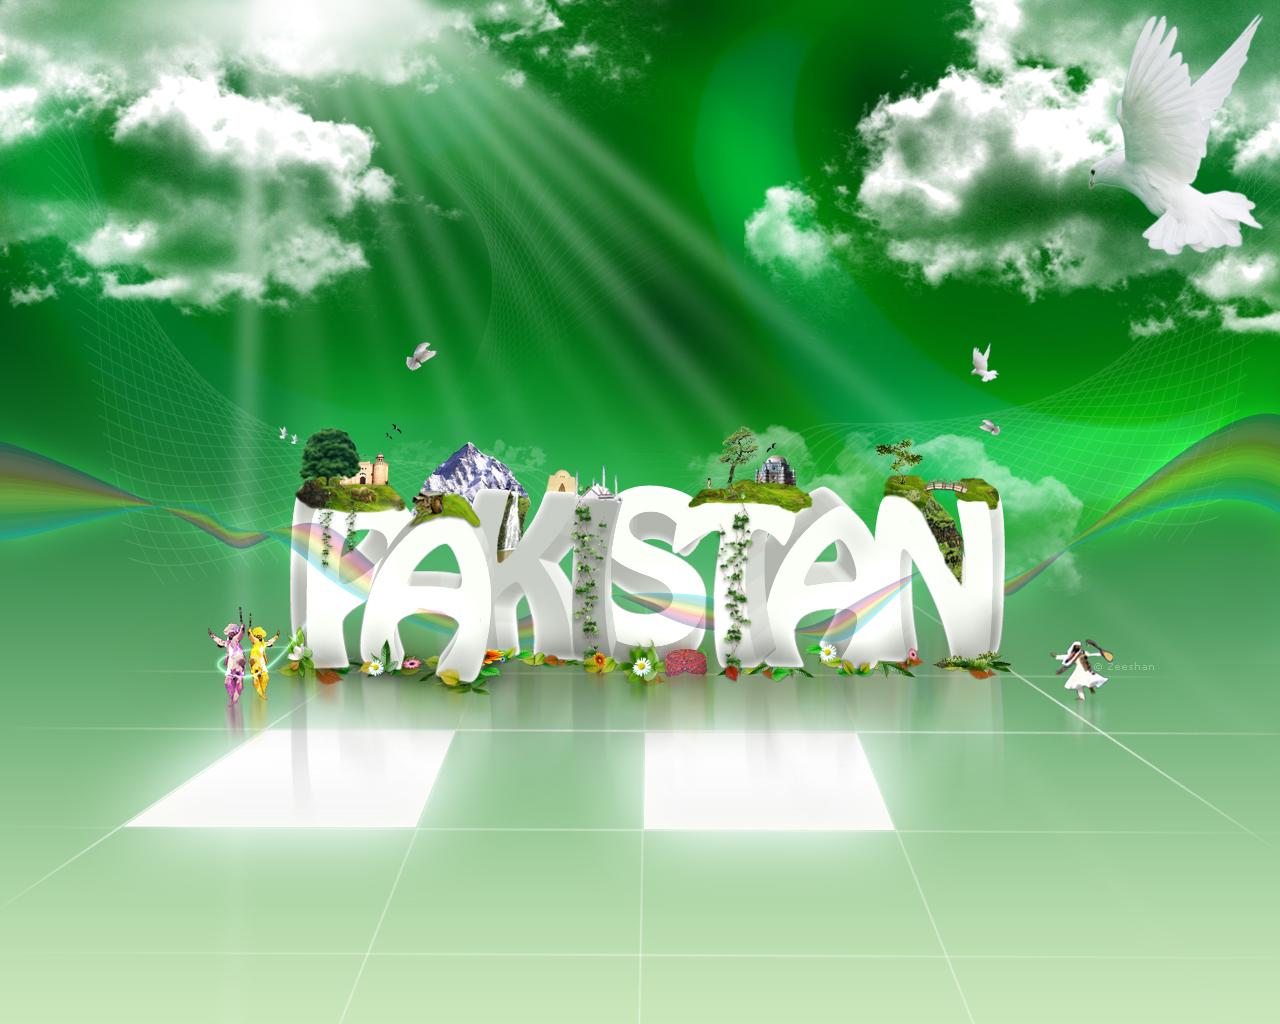 Free download pakistan day wallpaper gallery 23 march 2012